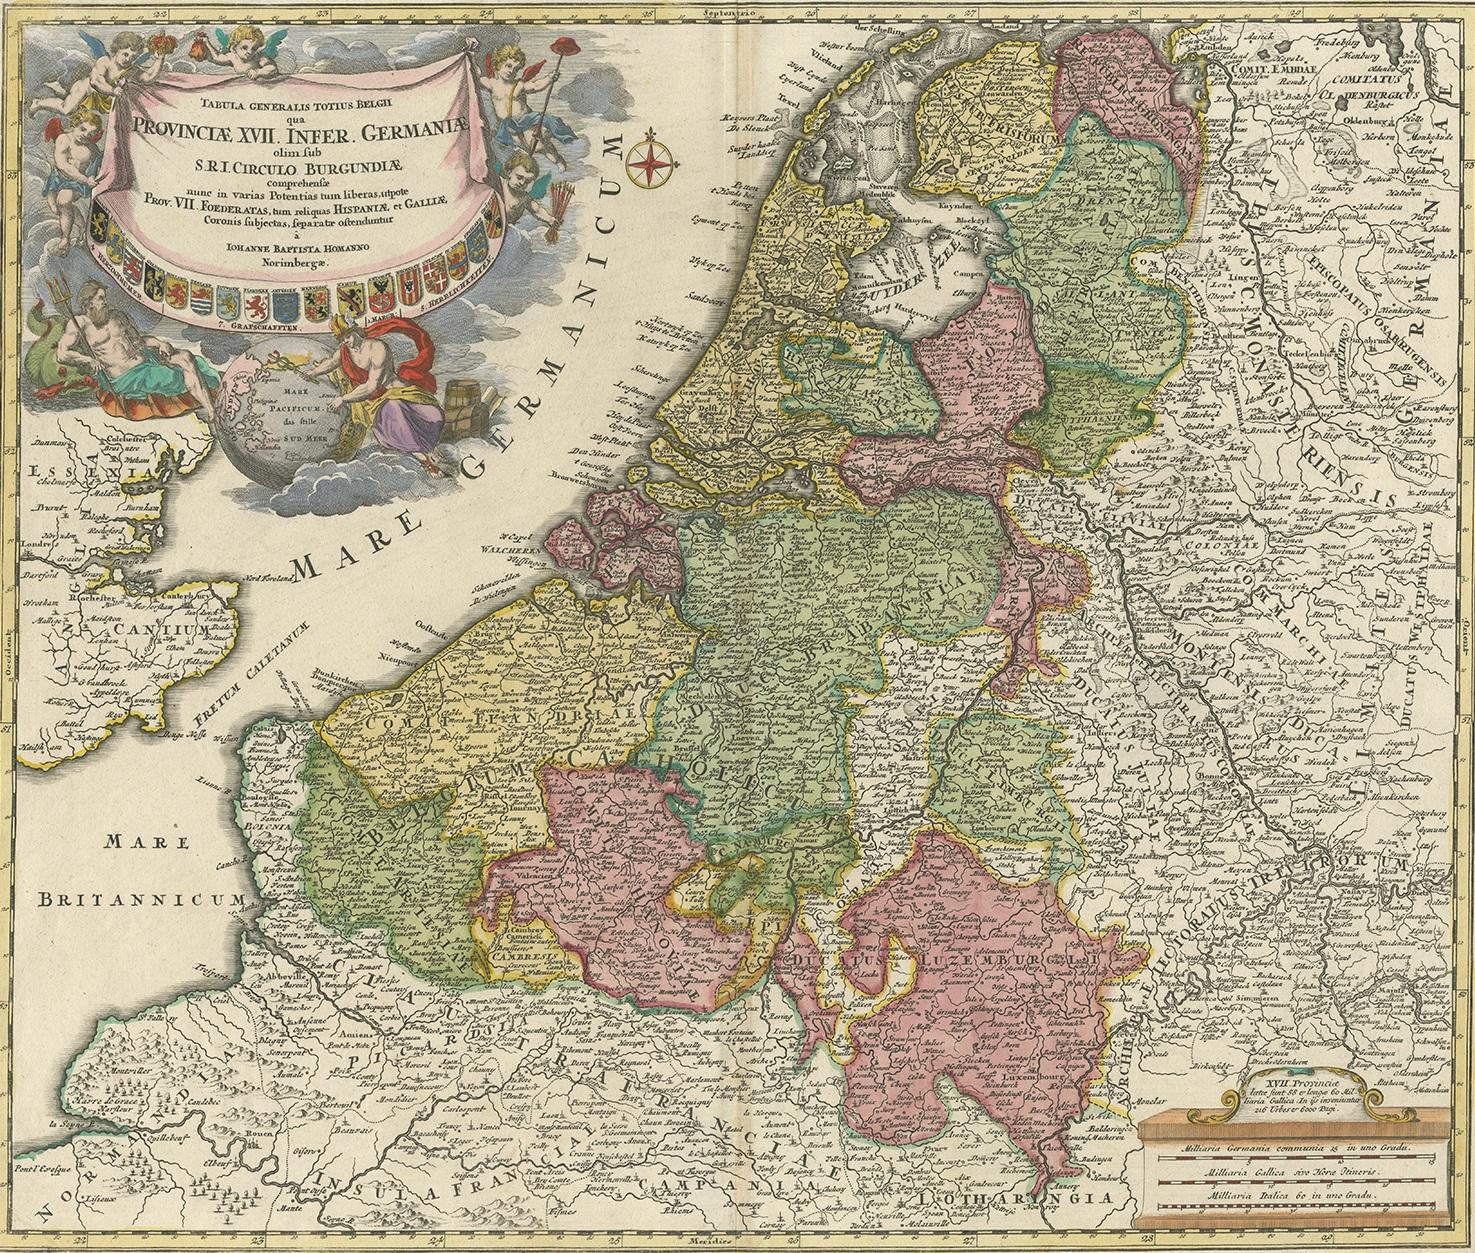 Antique map titled 'Tabula Generalis Totius Belgii Provinciae XVII. Infer. Germaniae (..)'. Map of the Benelux countries by Johann Baptist Homann. Shows the area between the Seine estuary and the Ems. Among the provinces Flanders, Brabant,